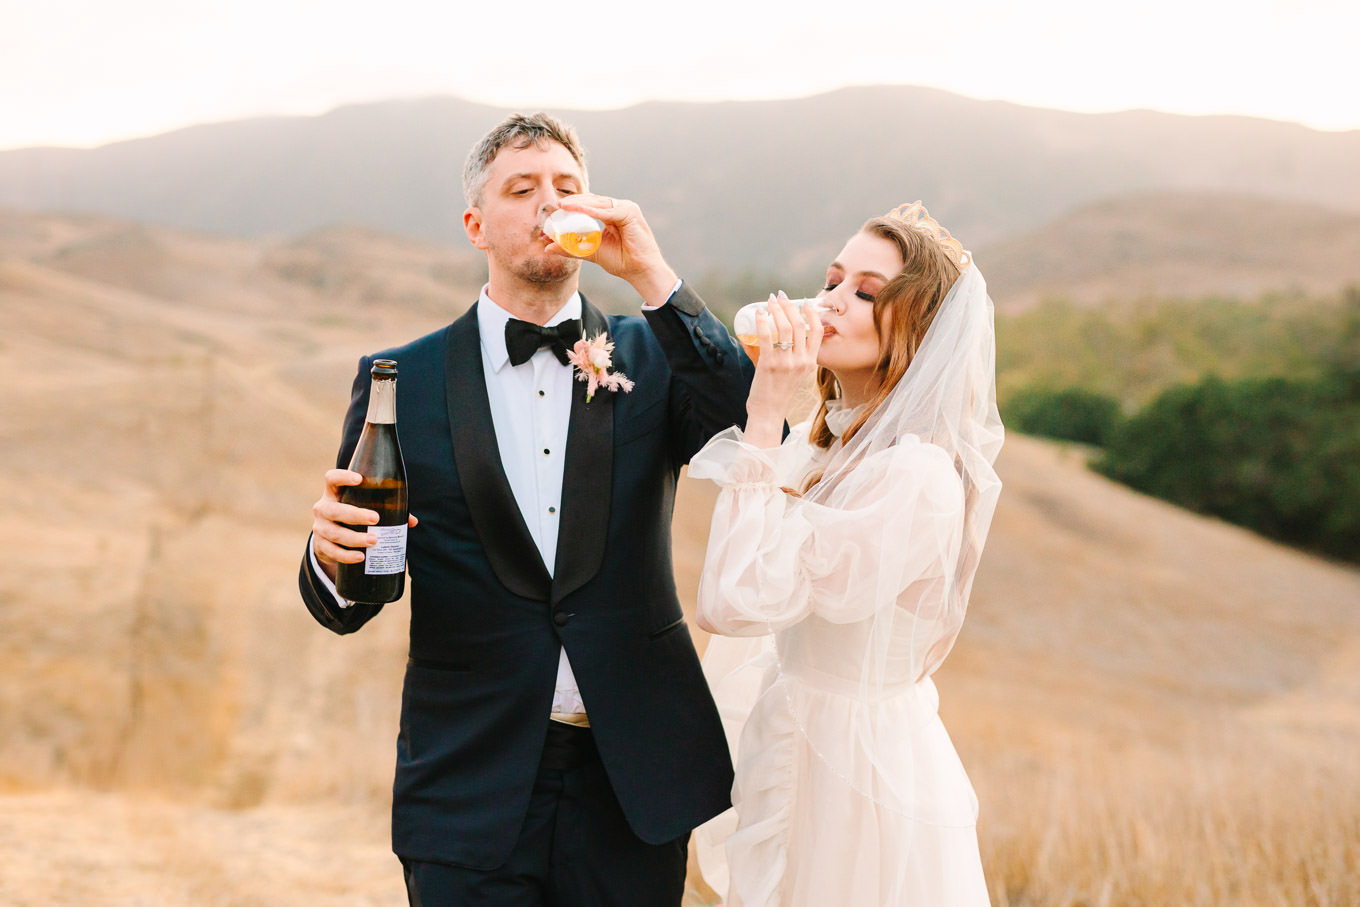 Bride and groom sunset wedding portraits | Allison Harvard’s colorful and quirky wedding at Higuera Ranch in San Luis Obispo | #sanluisobispowedding #californiawedding #higueraranch #madonnainn   Source: Mary Costa Photography | Los Angeles